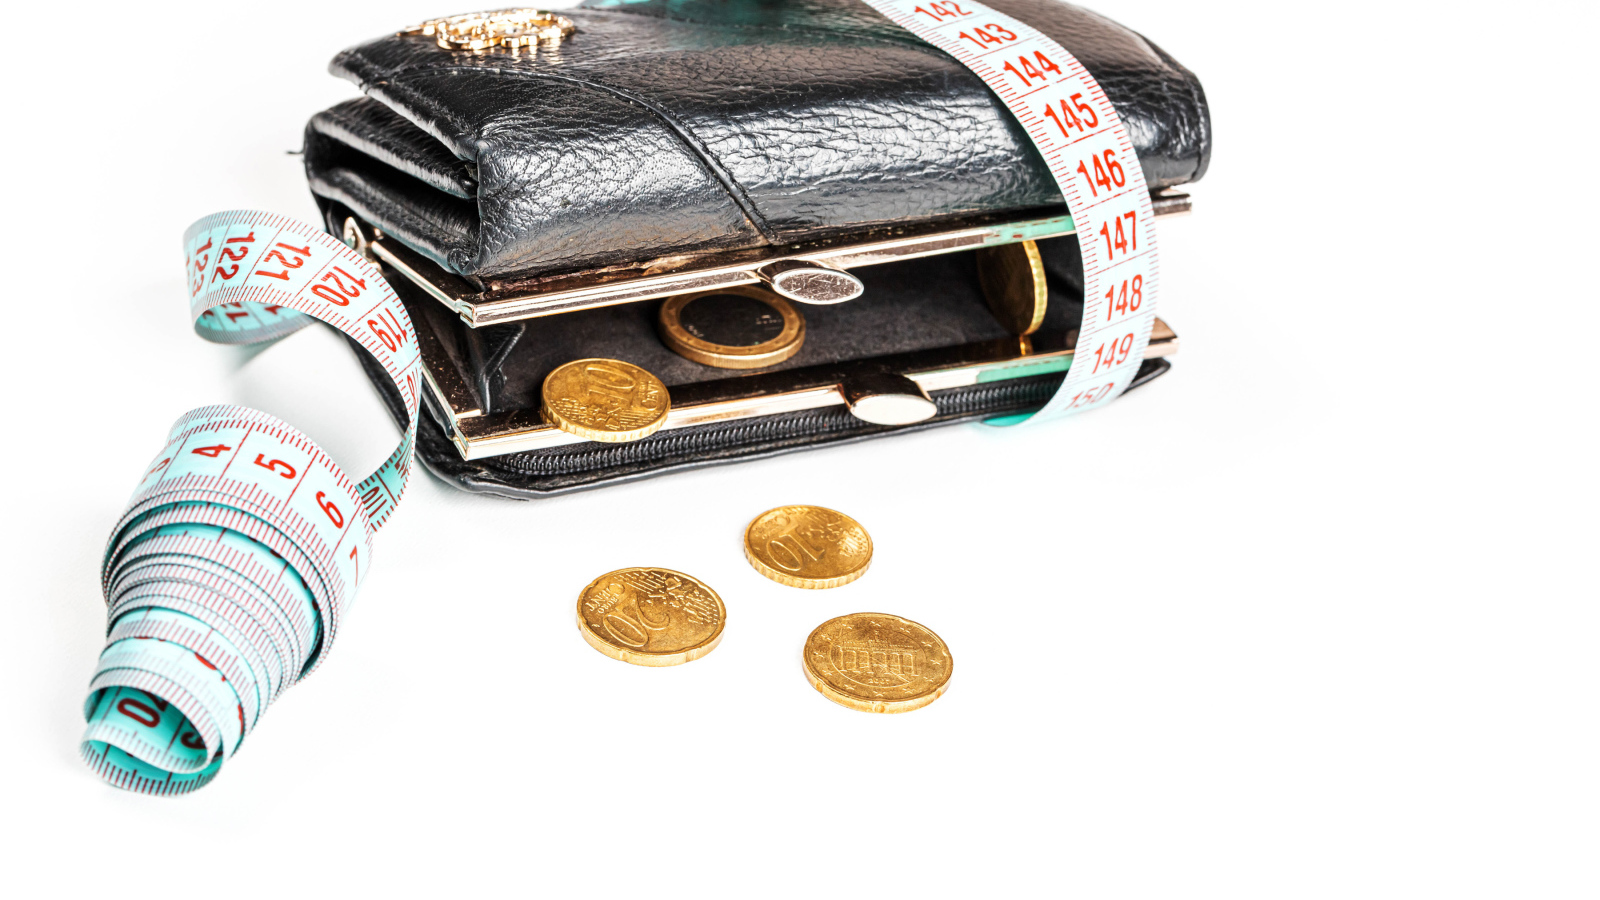 Black leather wallet with coins and a centimeter on a white background